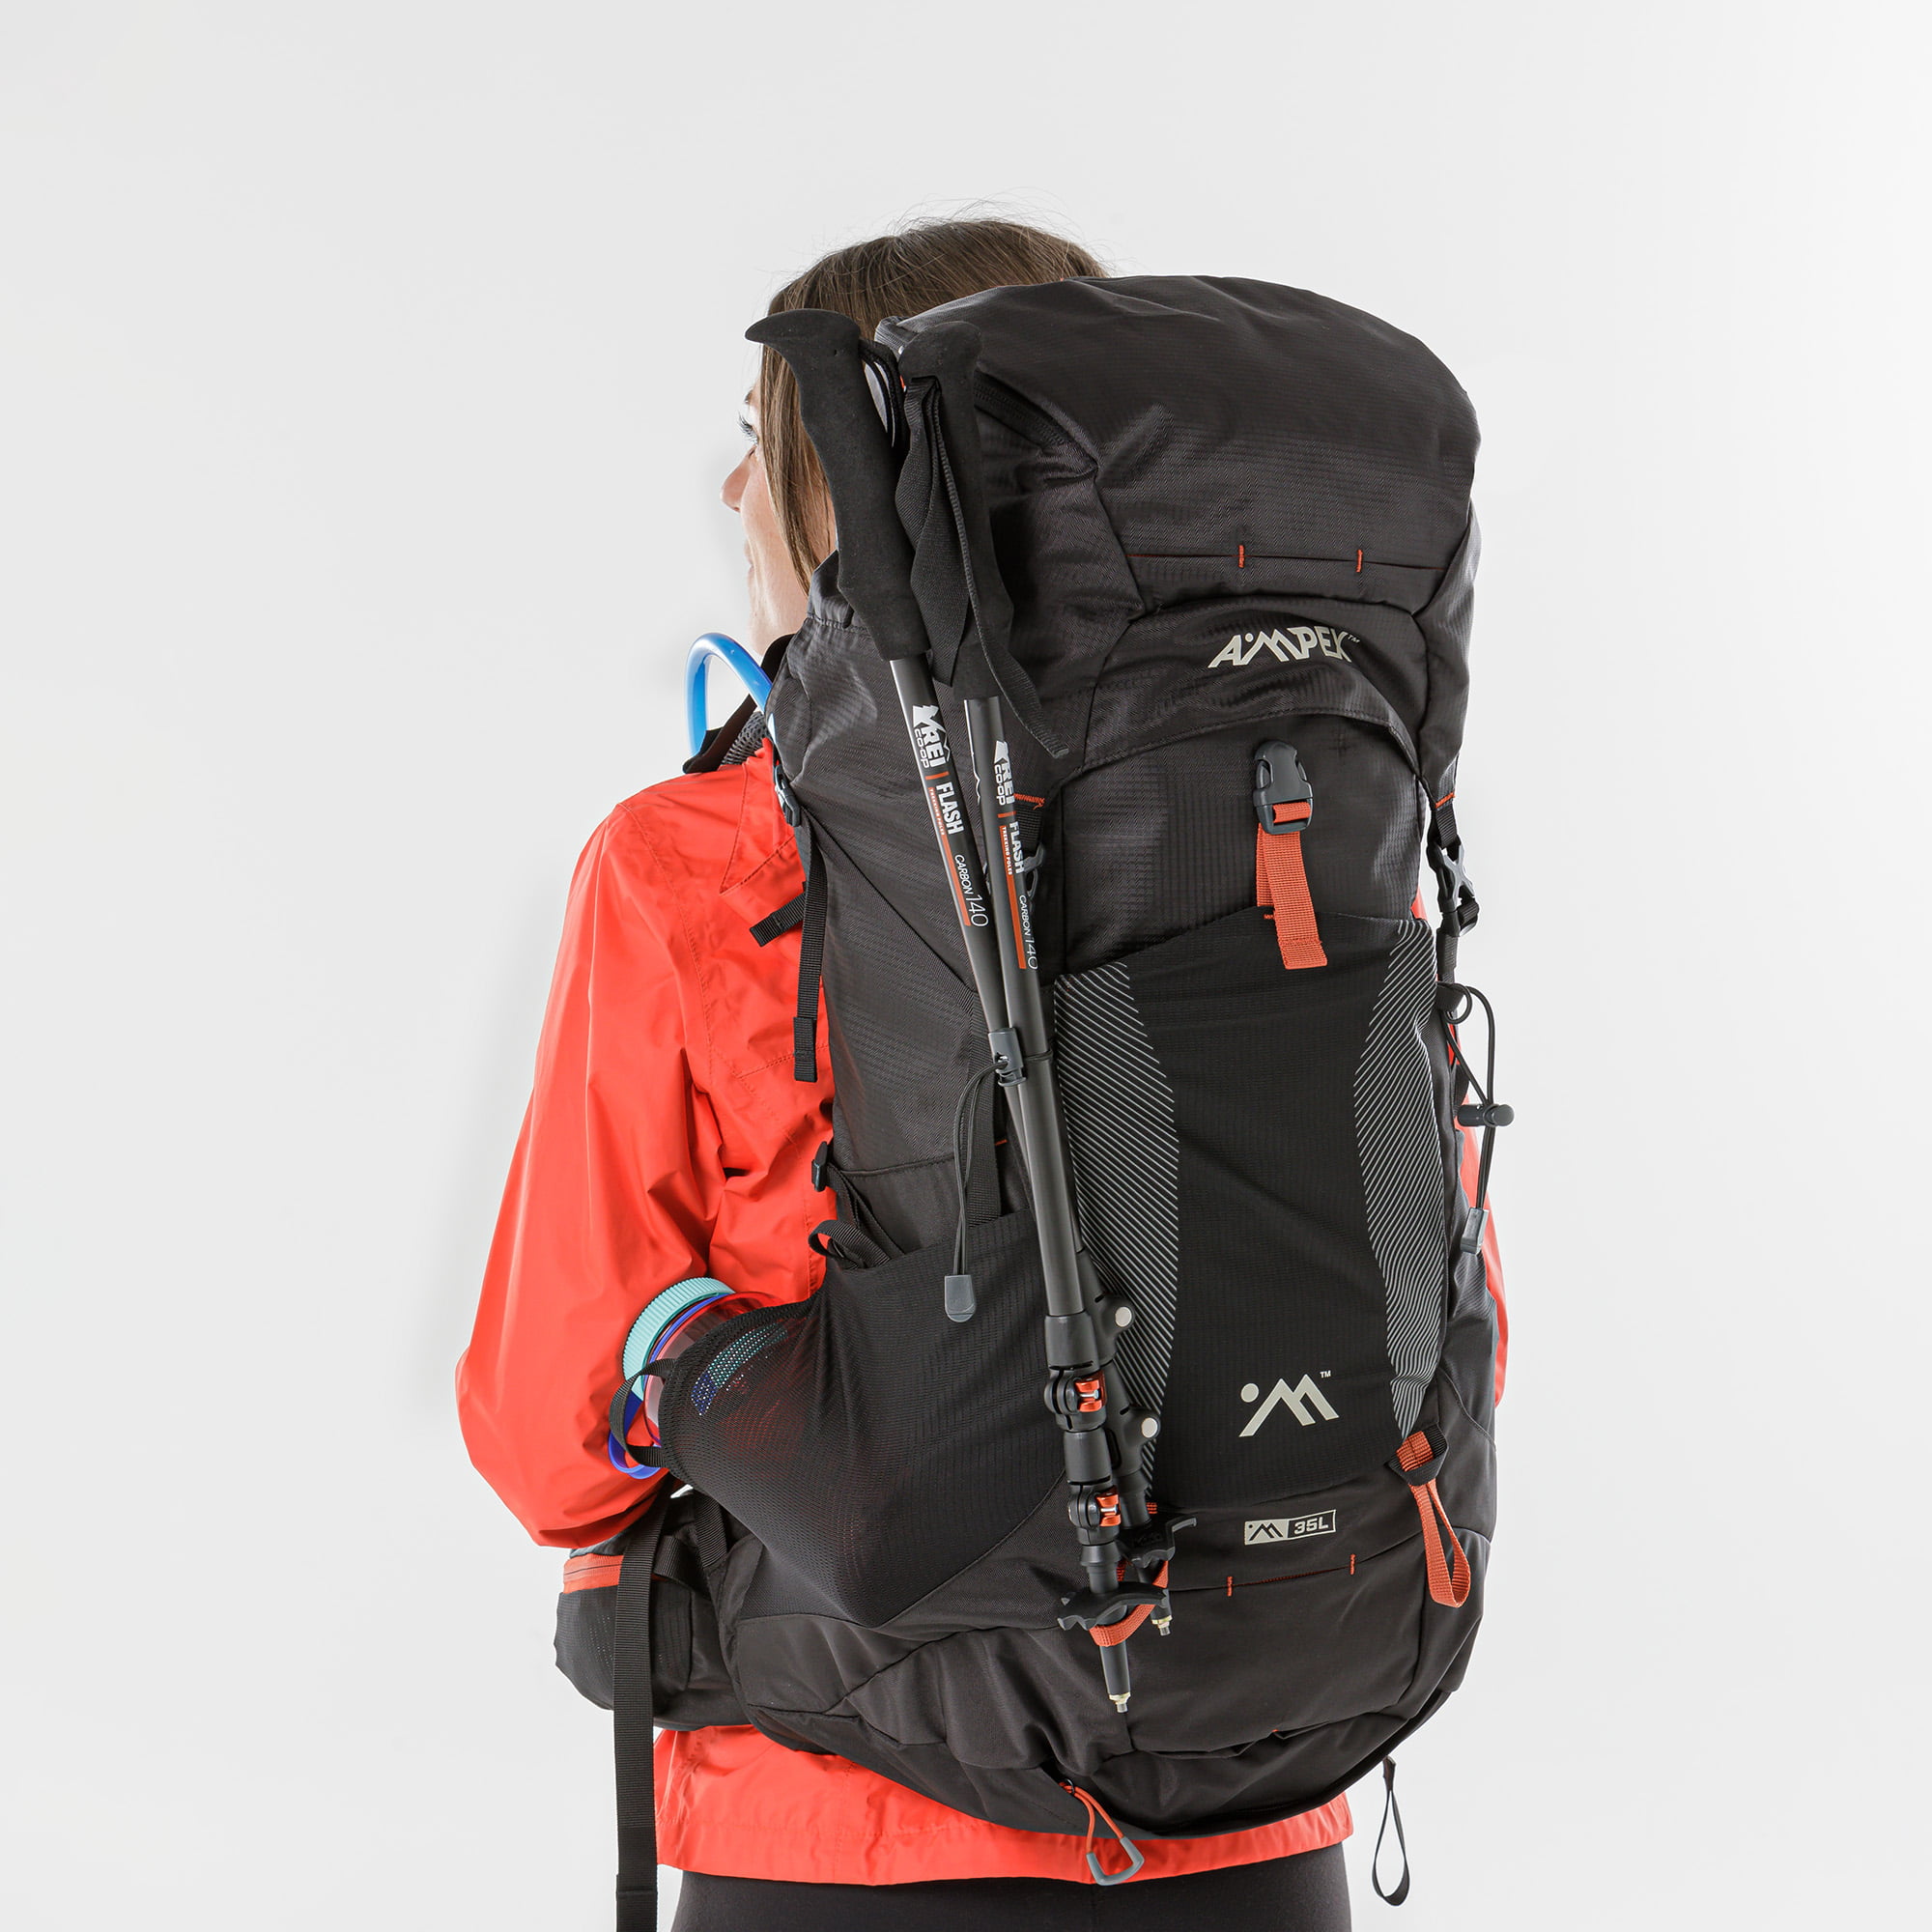 Performance Backpack 35L – Ampex Gear